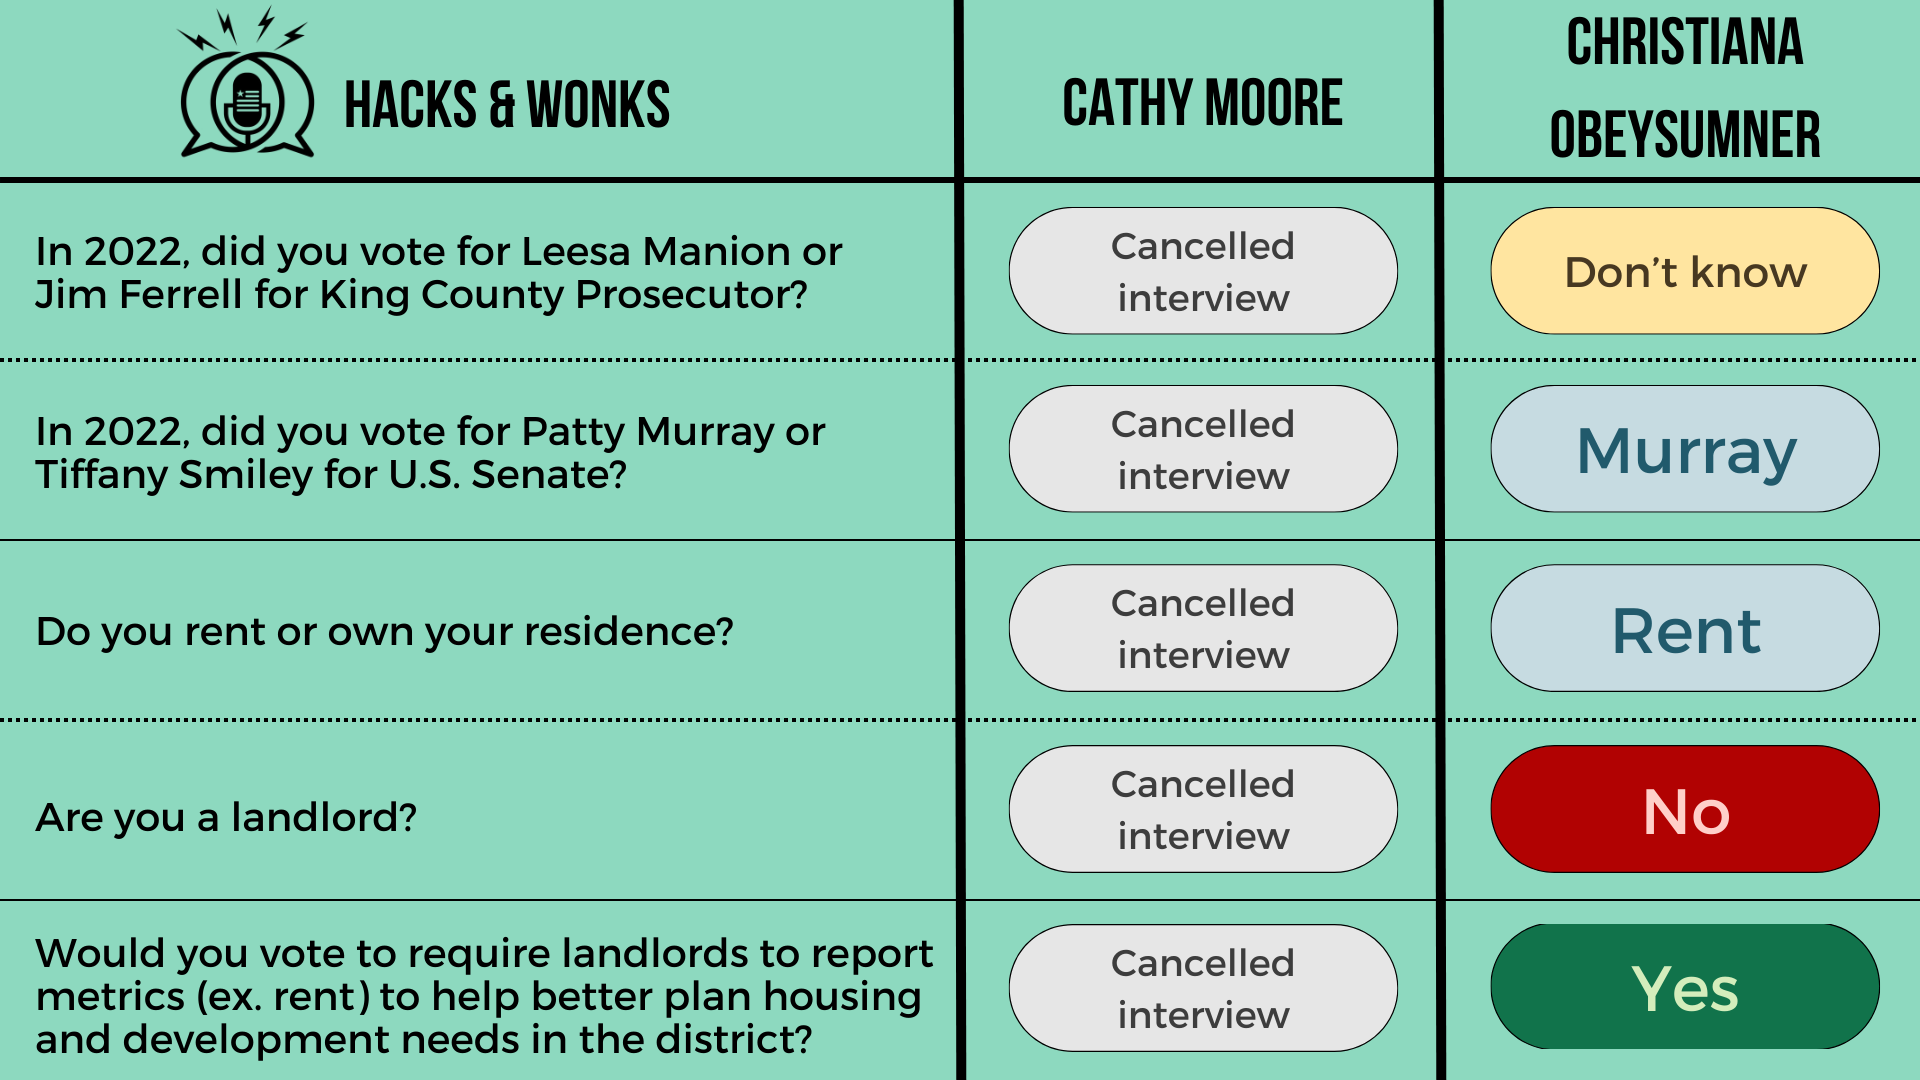 Q: In 2022, did you vote for Leesa Manion or Jim Ferrell for King County Prosecutor? Cathy Moore: Cancelled interview, ChrisTiana ObeySumner: Don’t know  Q: In 2022, did you vote for Patty Murray or Tiffany Smiley for U.S. Senate? Cathy Moore: Cancel